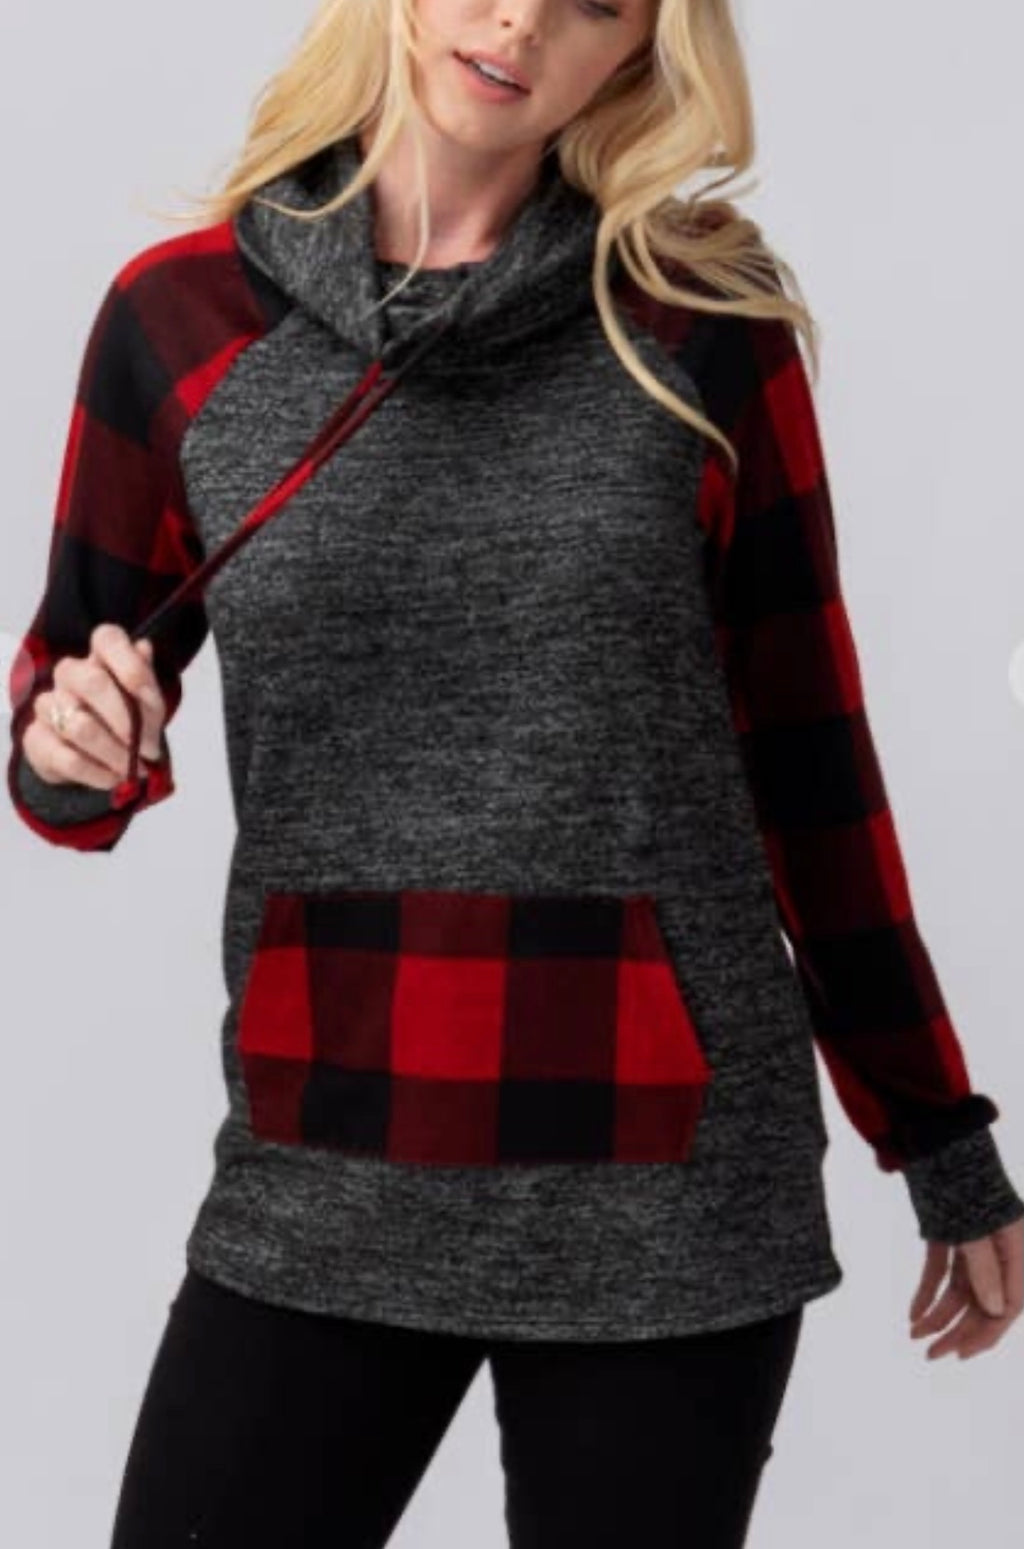 Pullover cowl neck hoodie with drawstring.   The Buffalo plaid adds the prefect splash of Winter to this cute cowl neck!